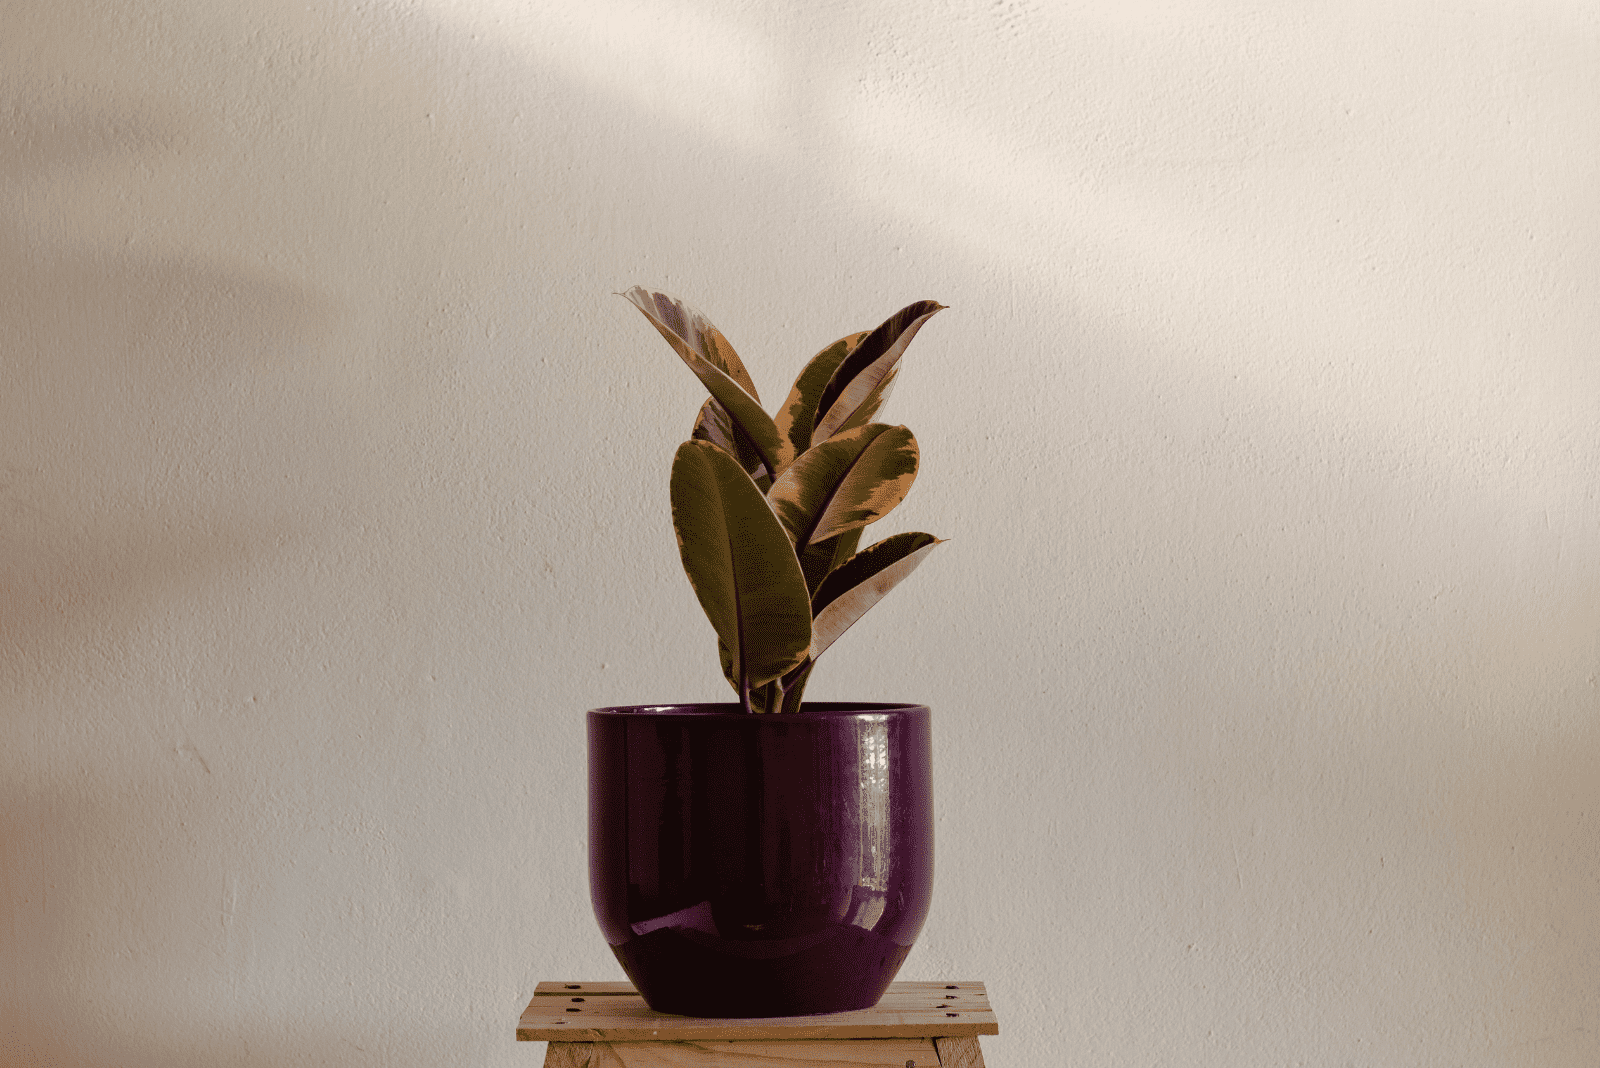 Variegated Rubber Plant in a pot on the table